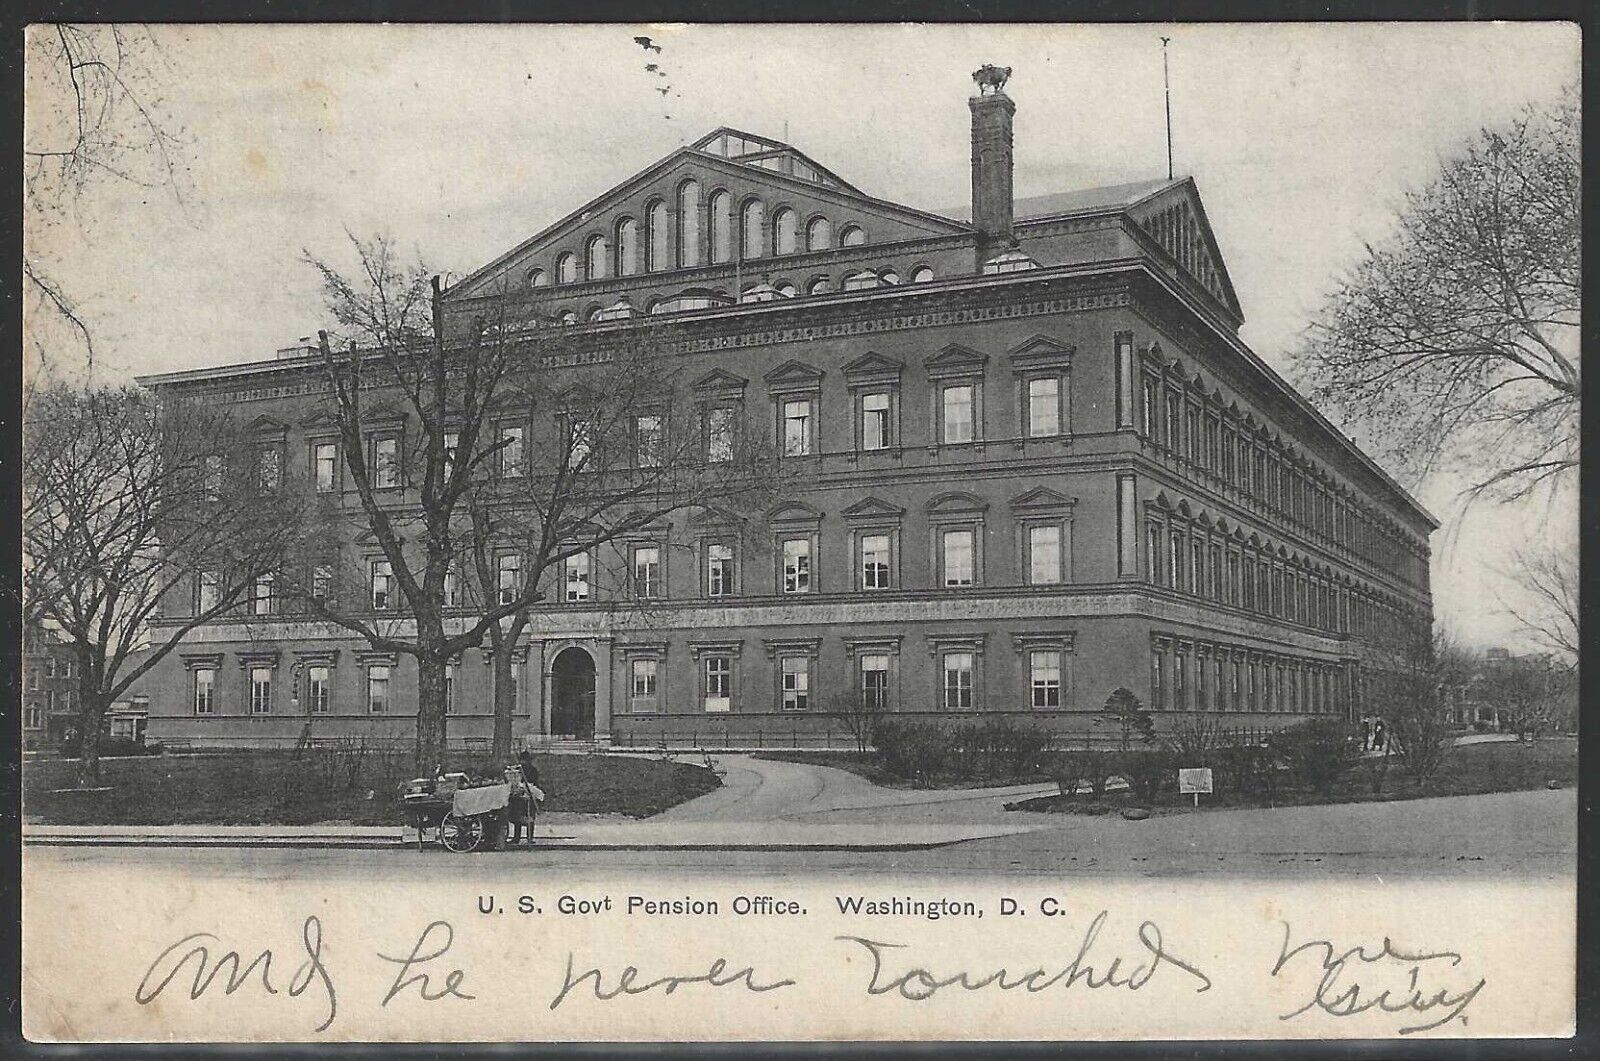 U.S. Government Pension Office, Washington, D.C., Early Postcard, Used in 1907